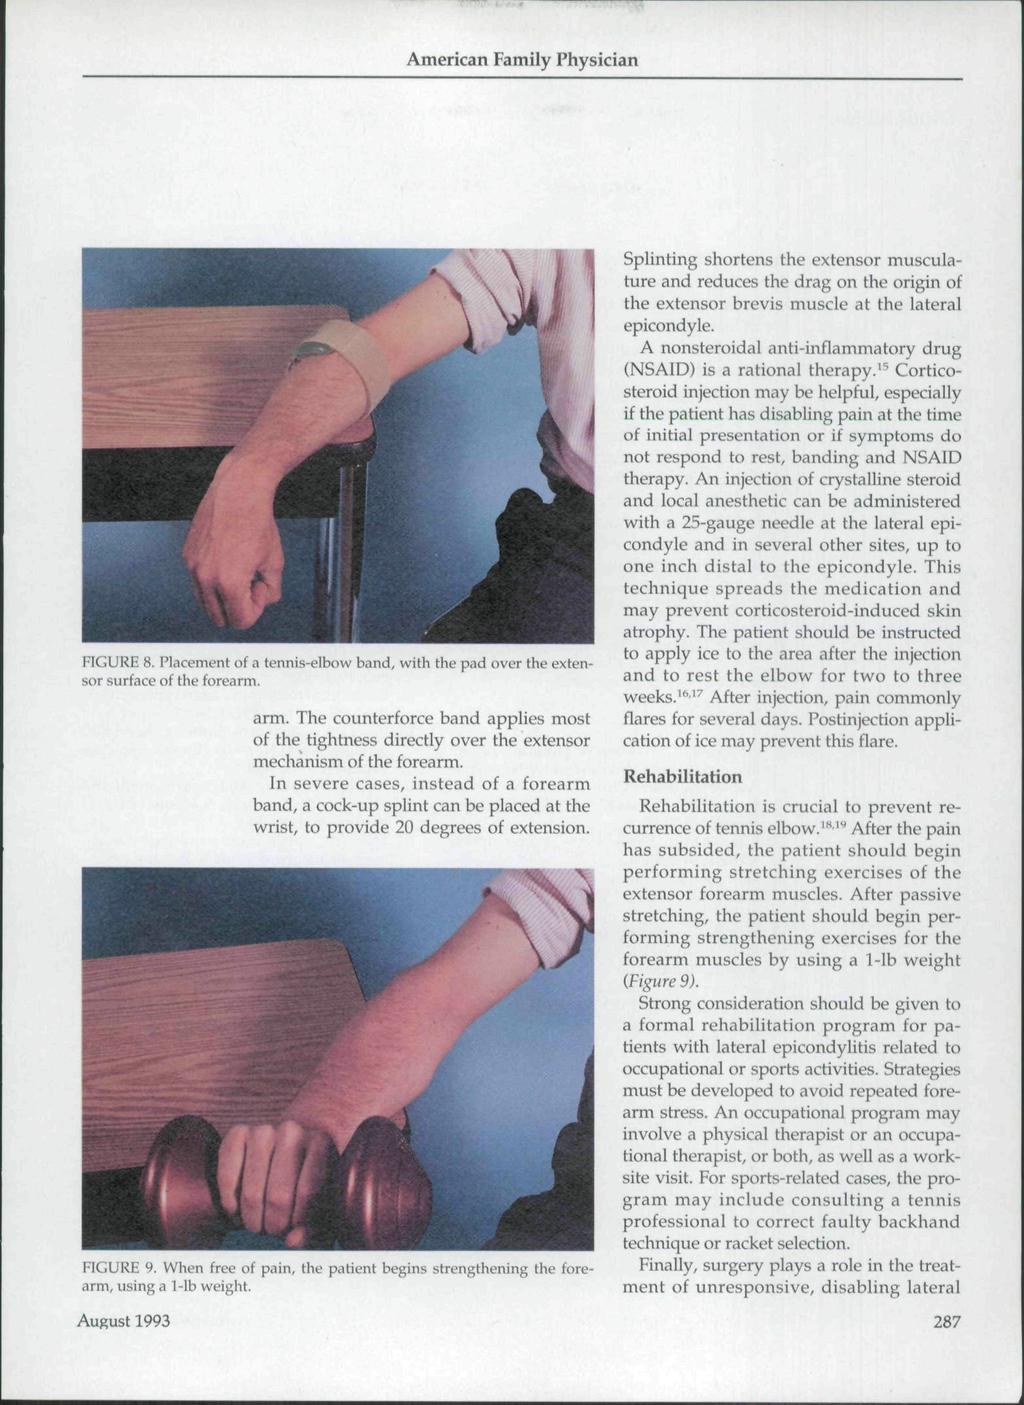 FIGURE 8. ruicement oi a tennis-elbow band, with the pad over the extensor surface of the forearm. arm.